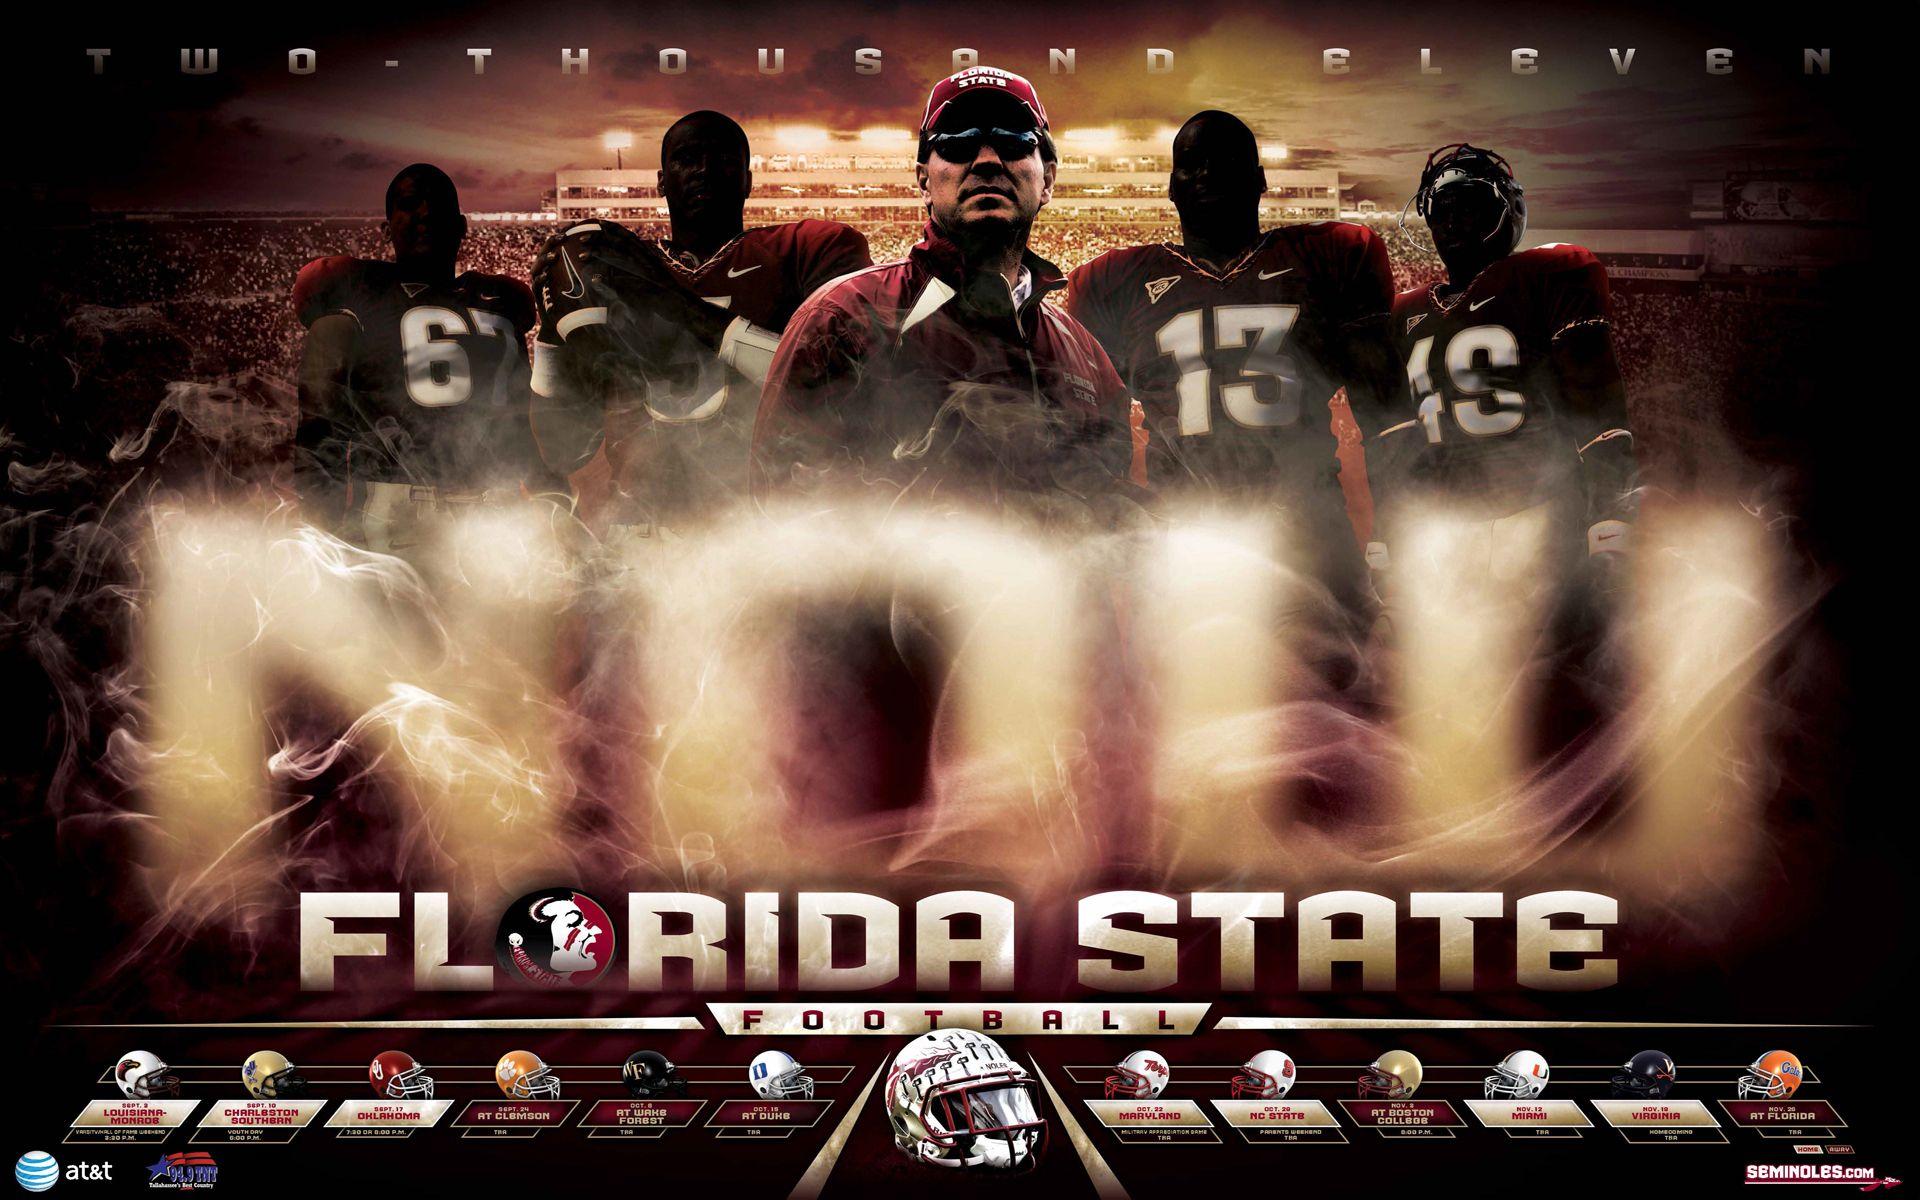 image about EVERY THING FLORIDA STATE!!!!!!!